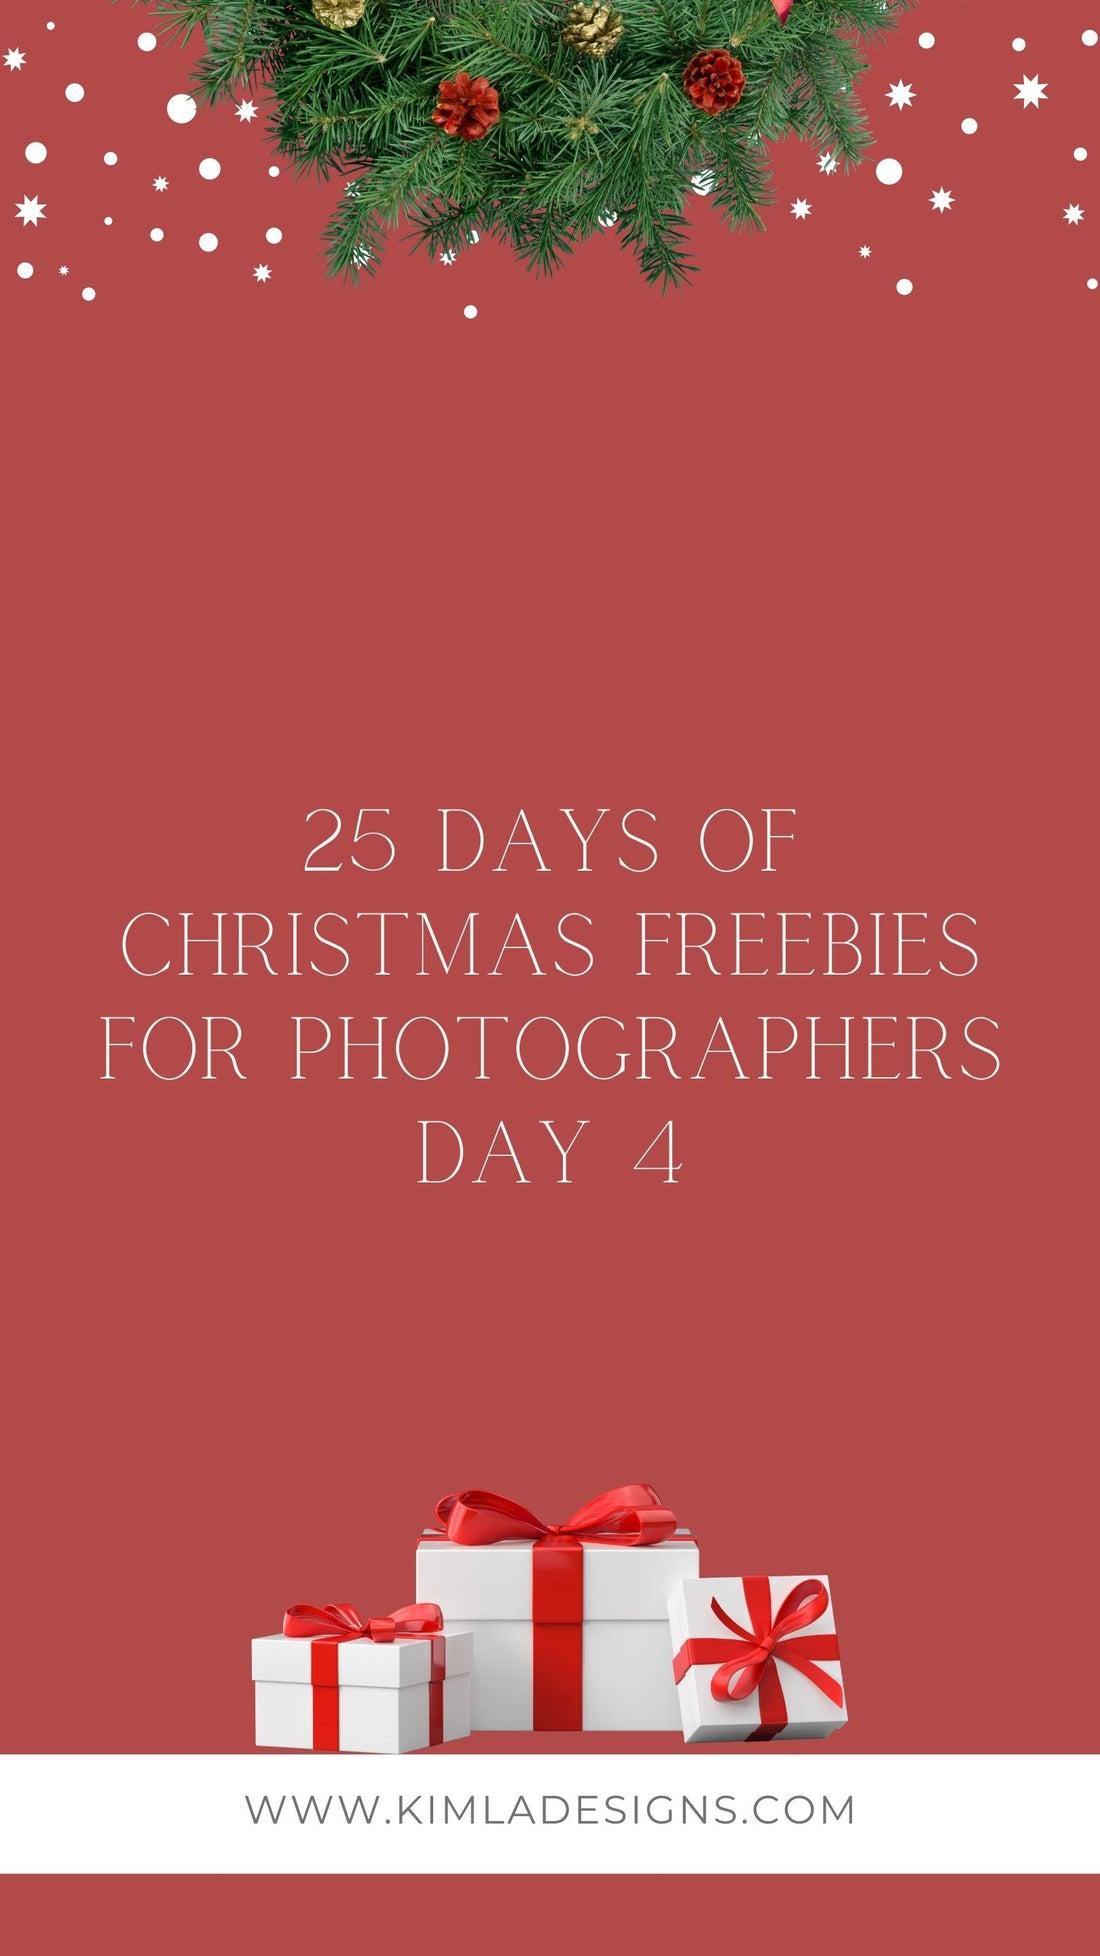 25 Days of Christmas Freebies Day 4th